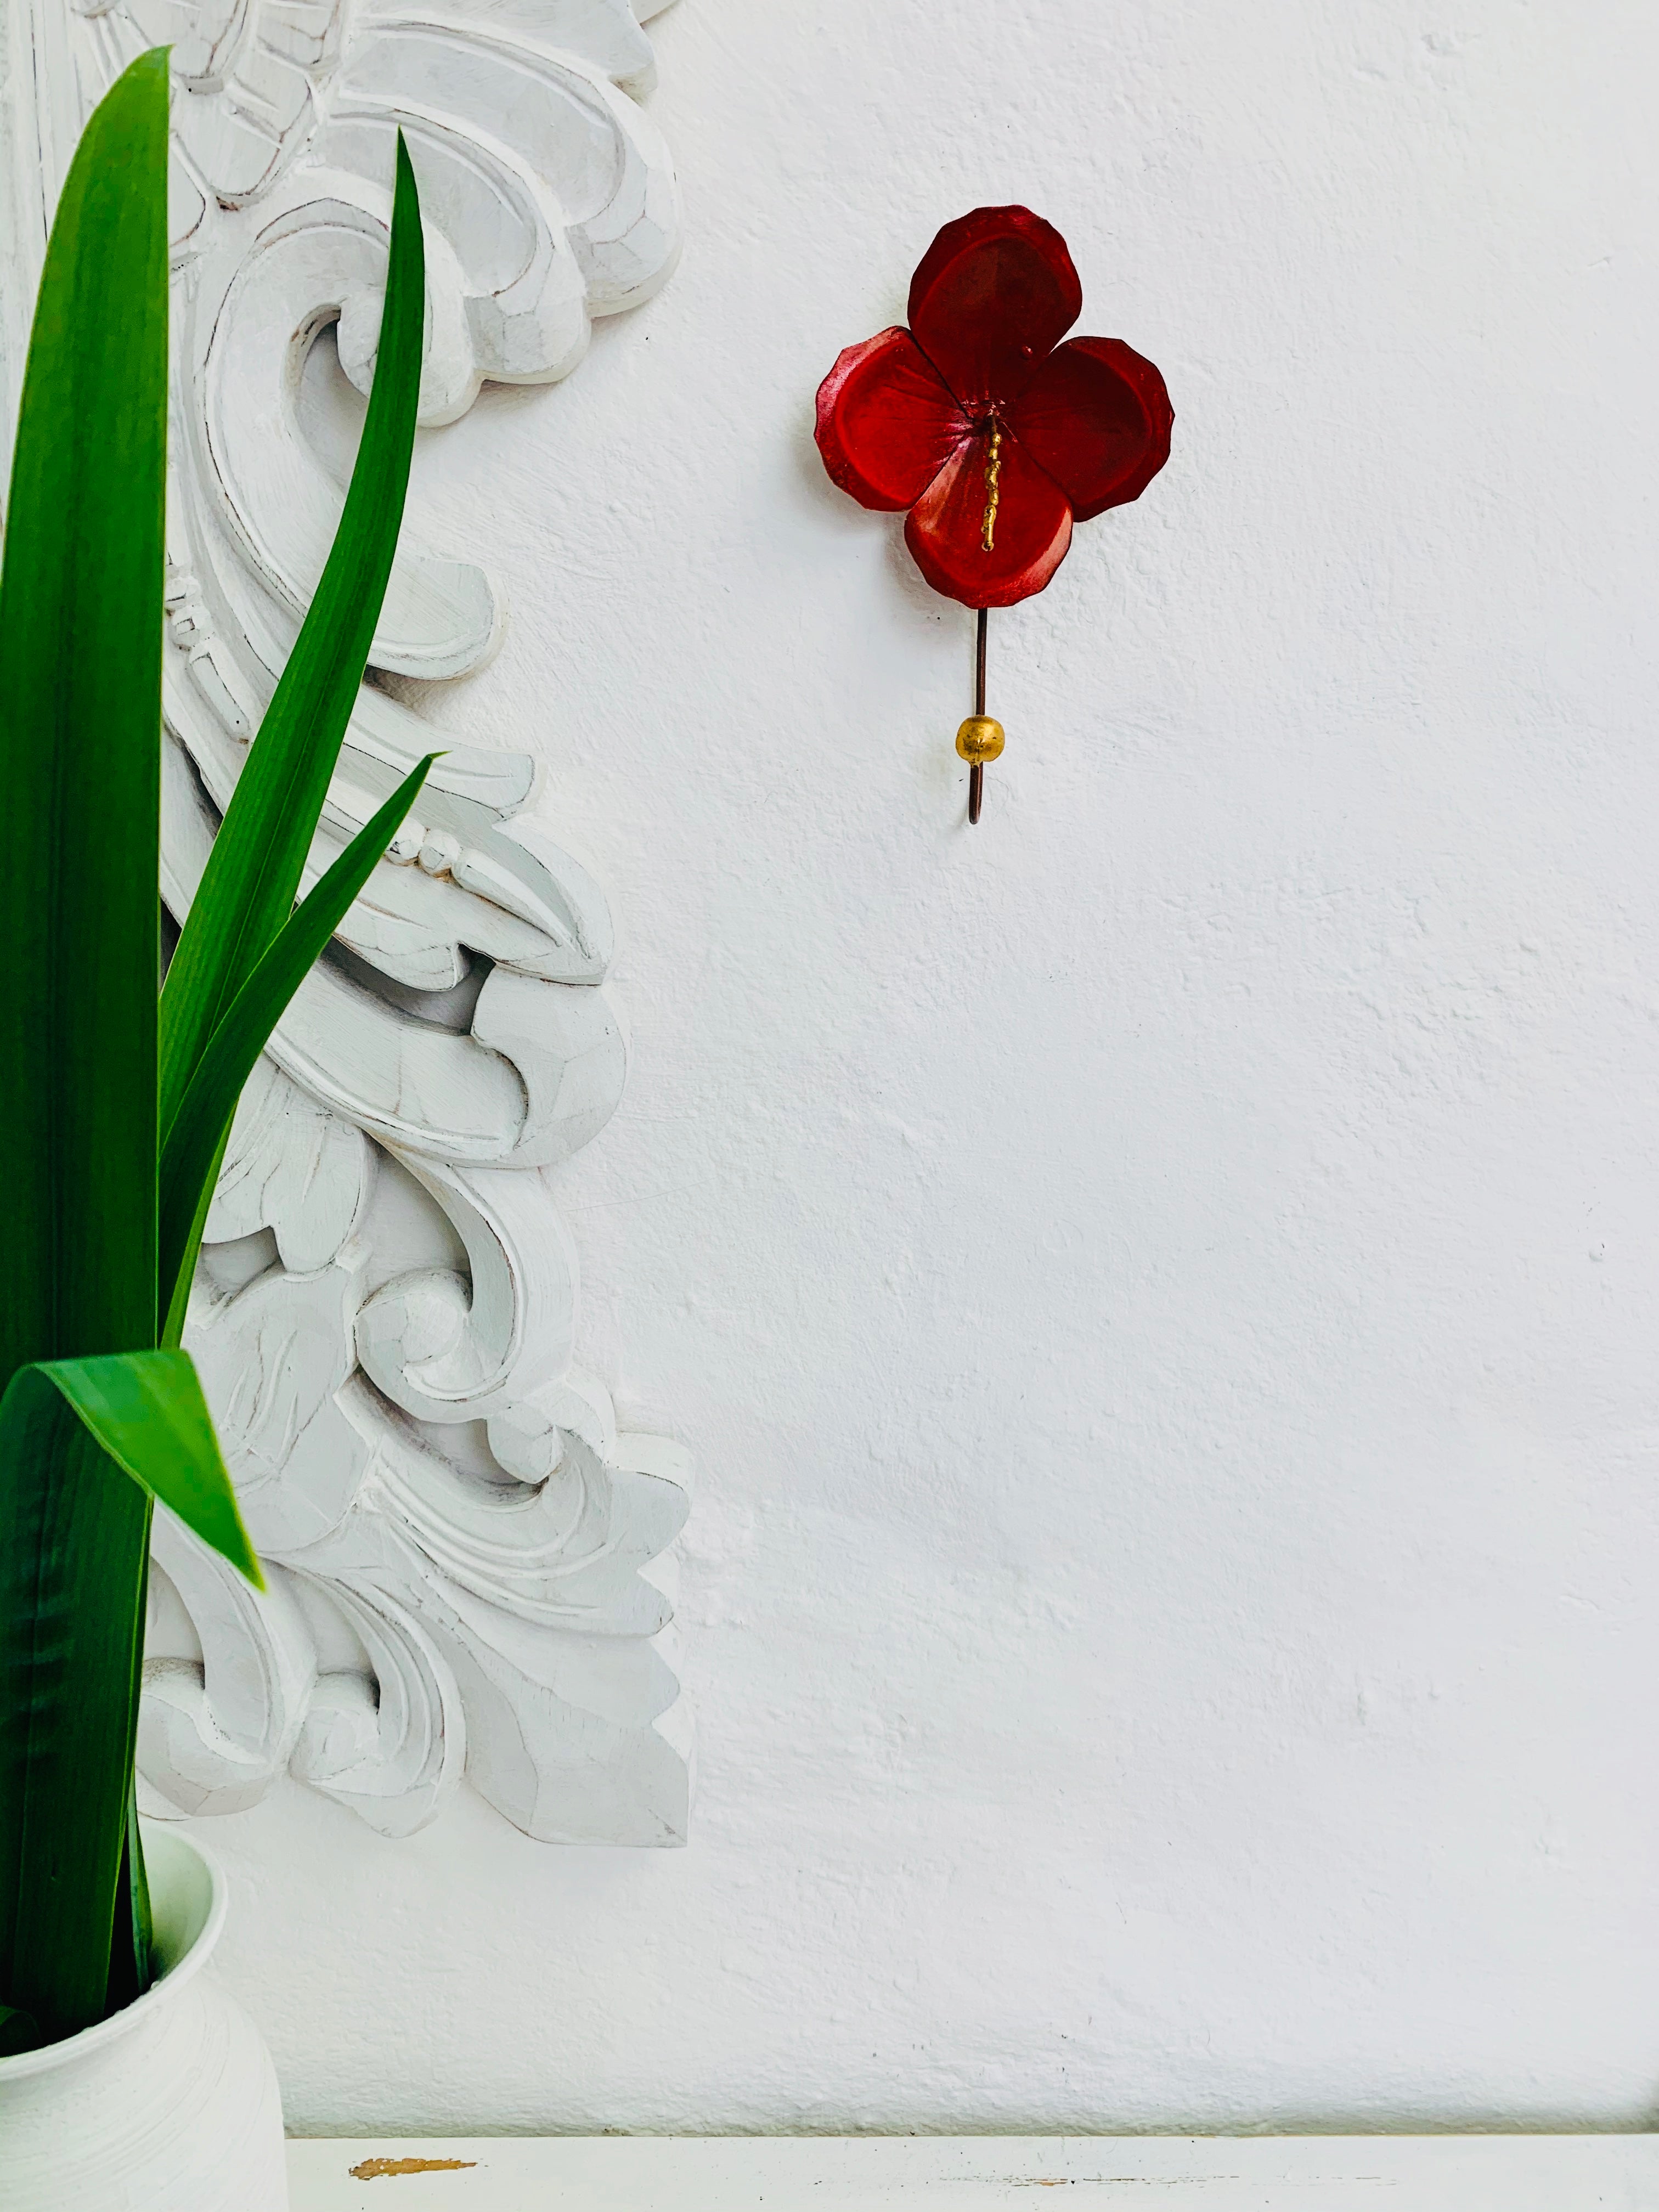 display view of hibiscus flower hook on wall next to a plant